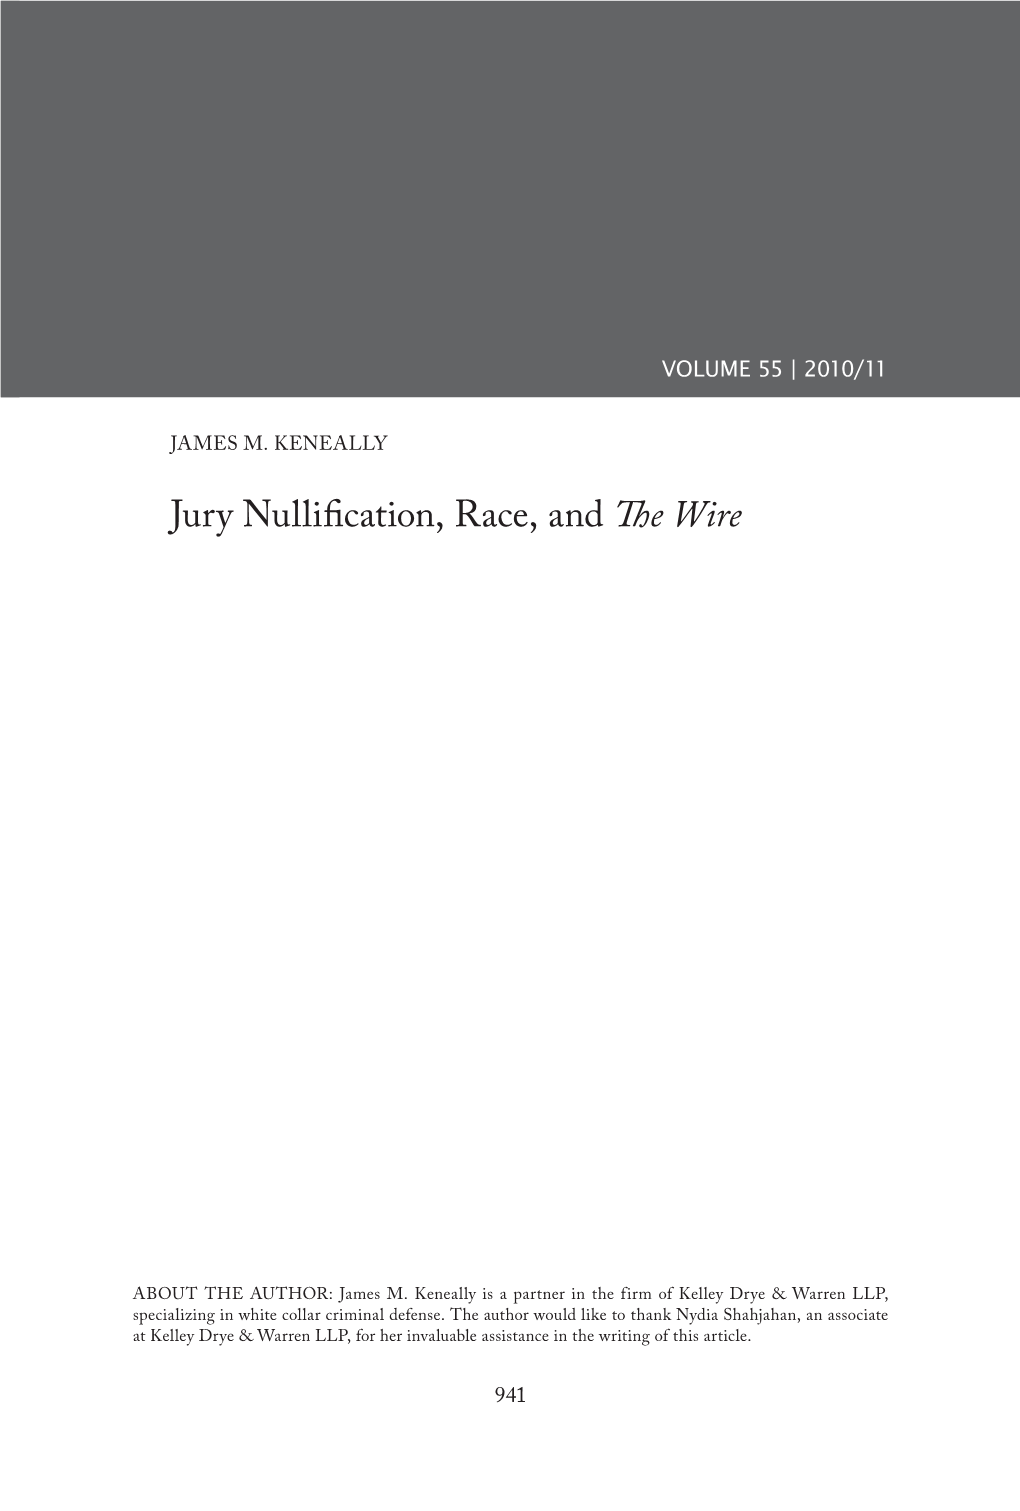 Jury Nullification, Race, and the Wire